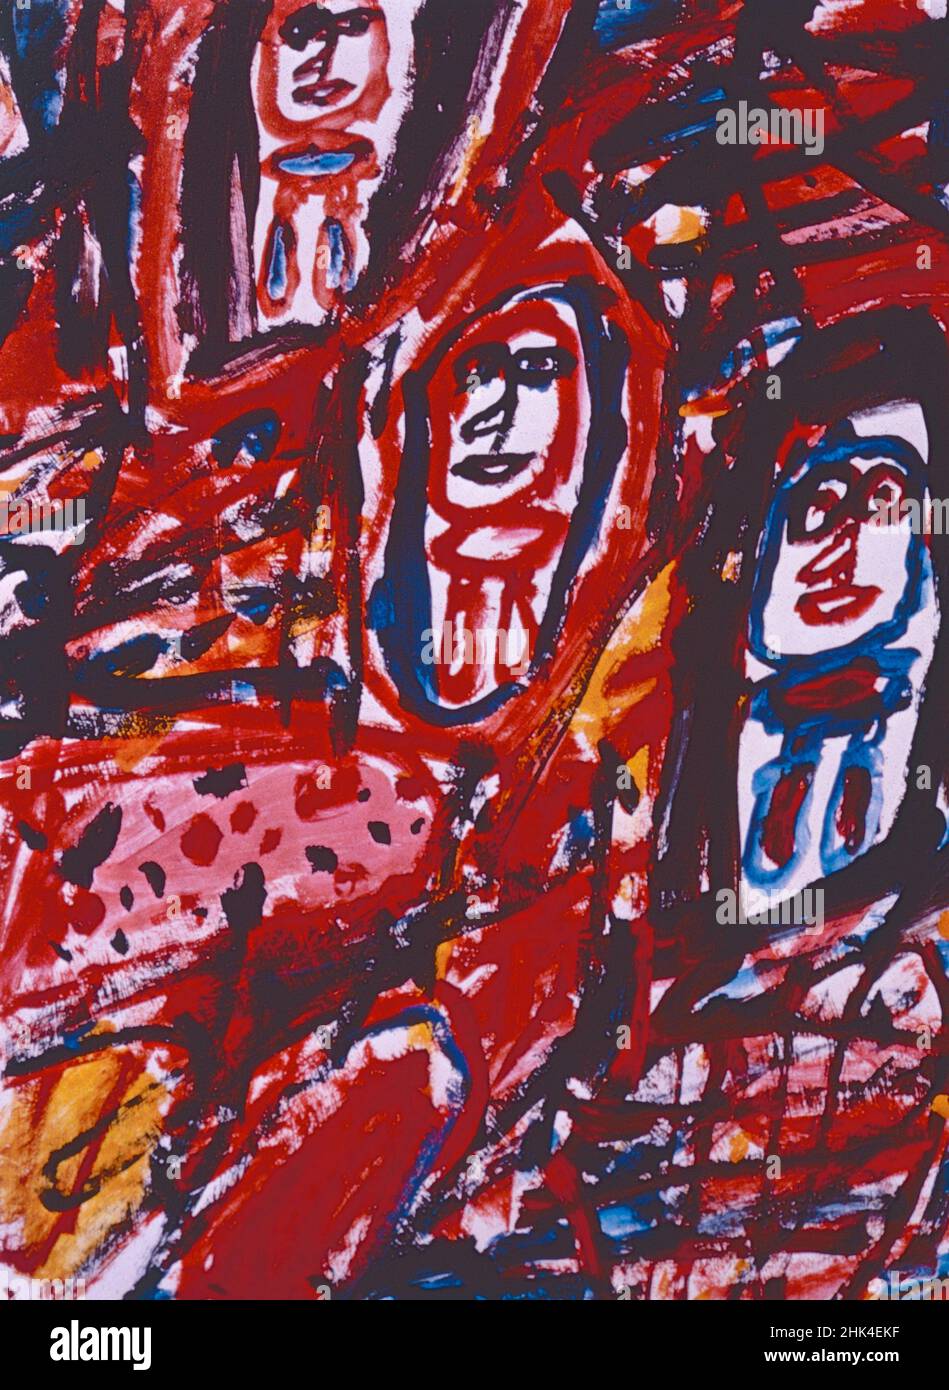 Site avec 3 personnages, Artwork by French artist Jean Dubuffet, 1981 Stock Photo